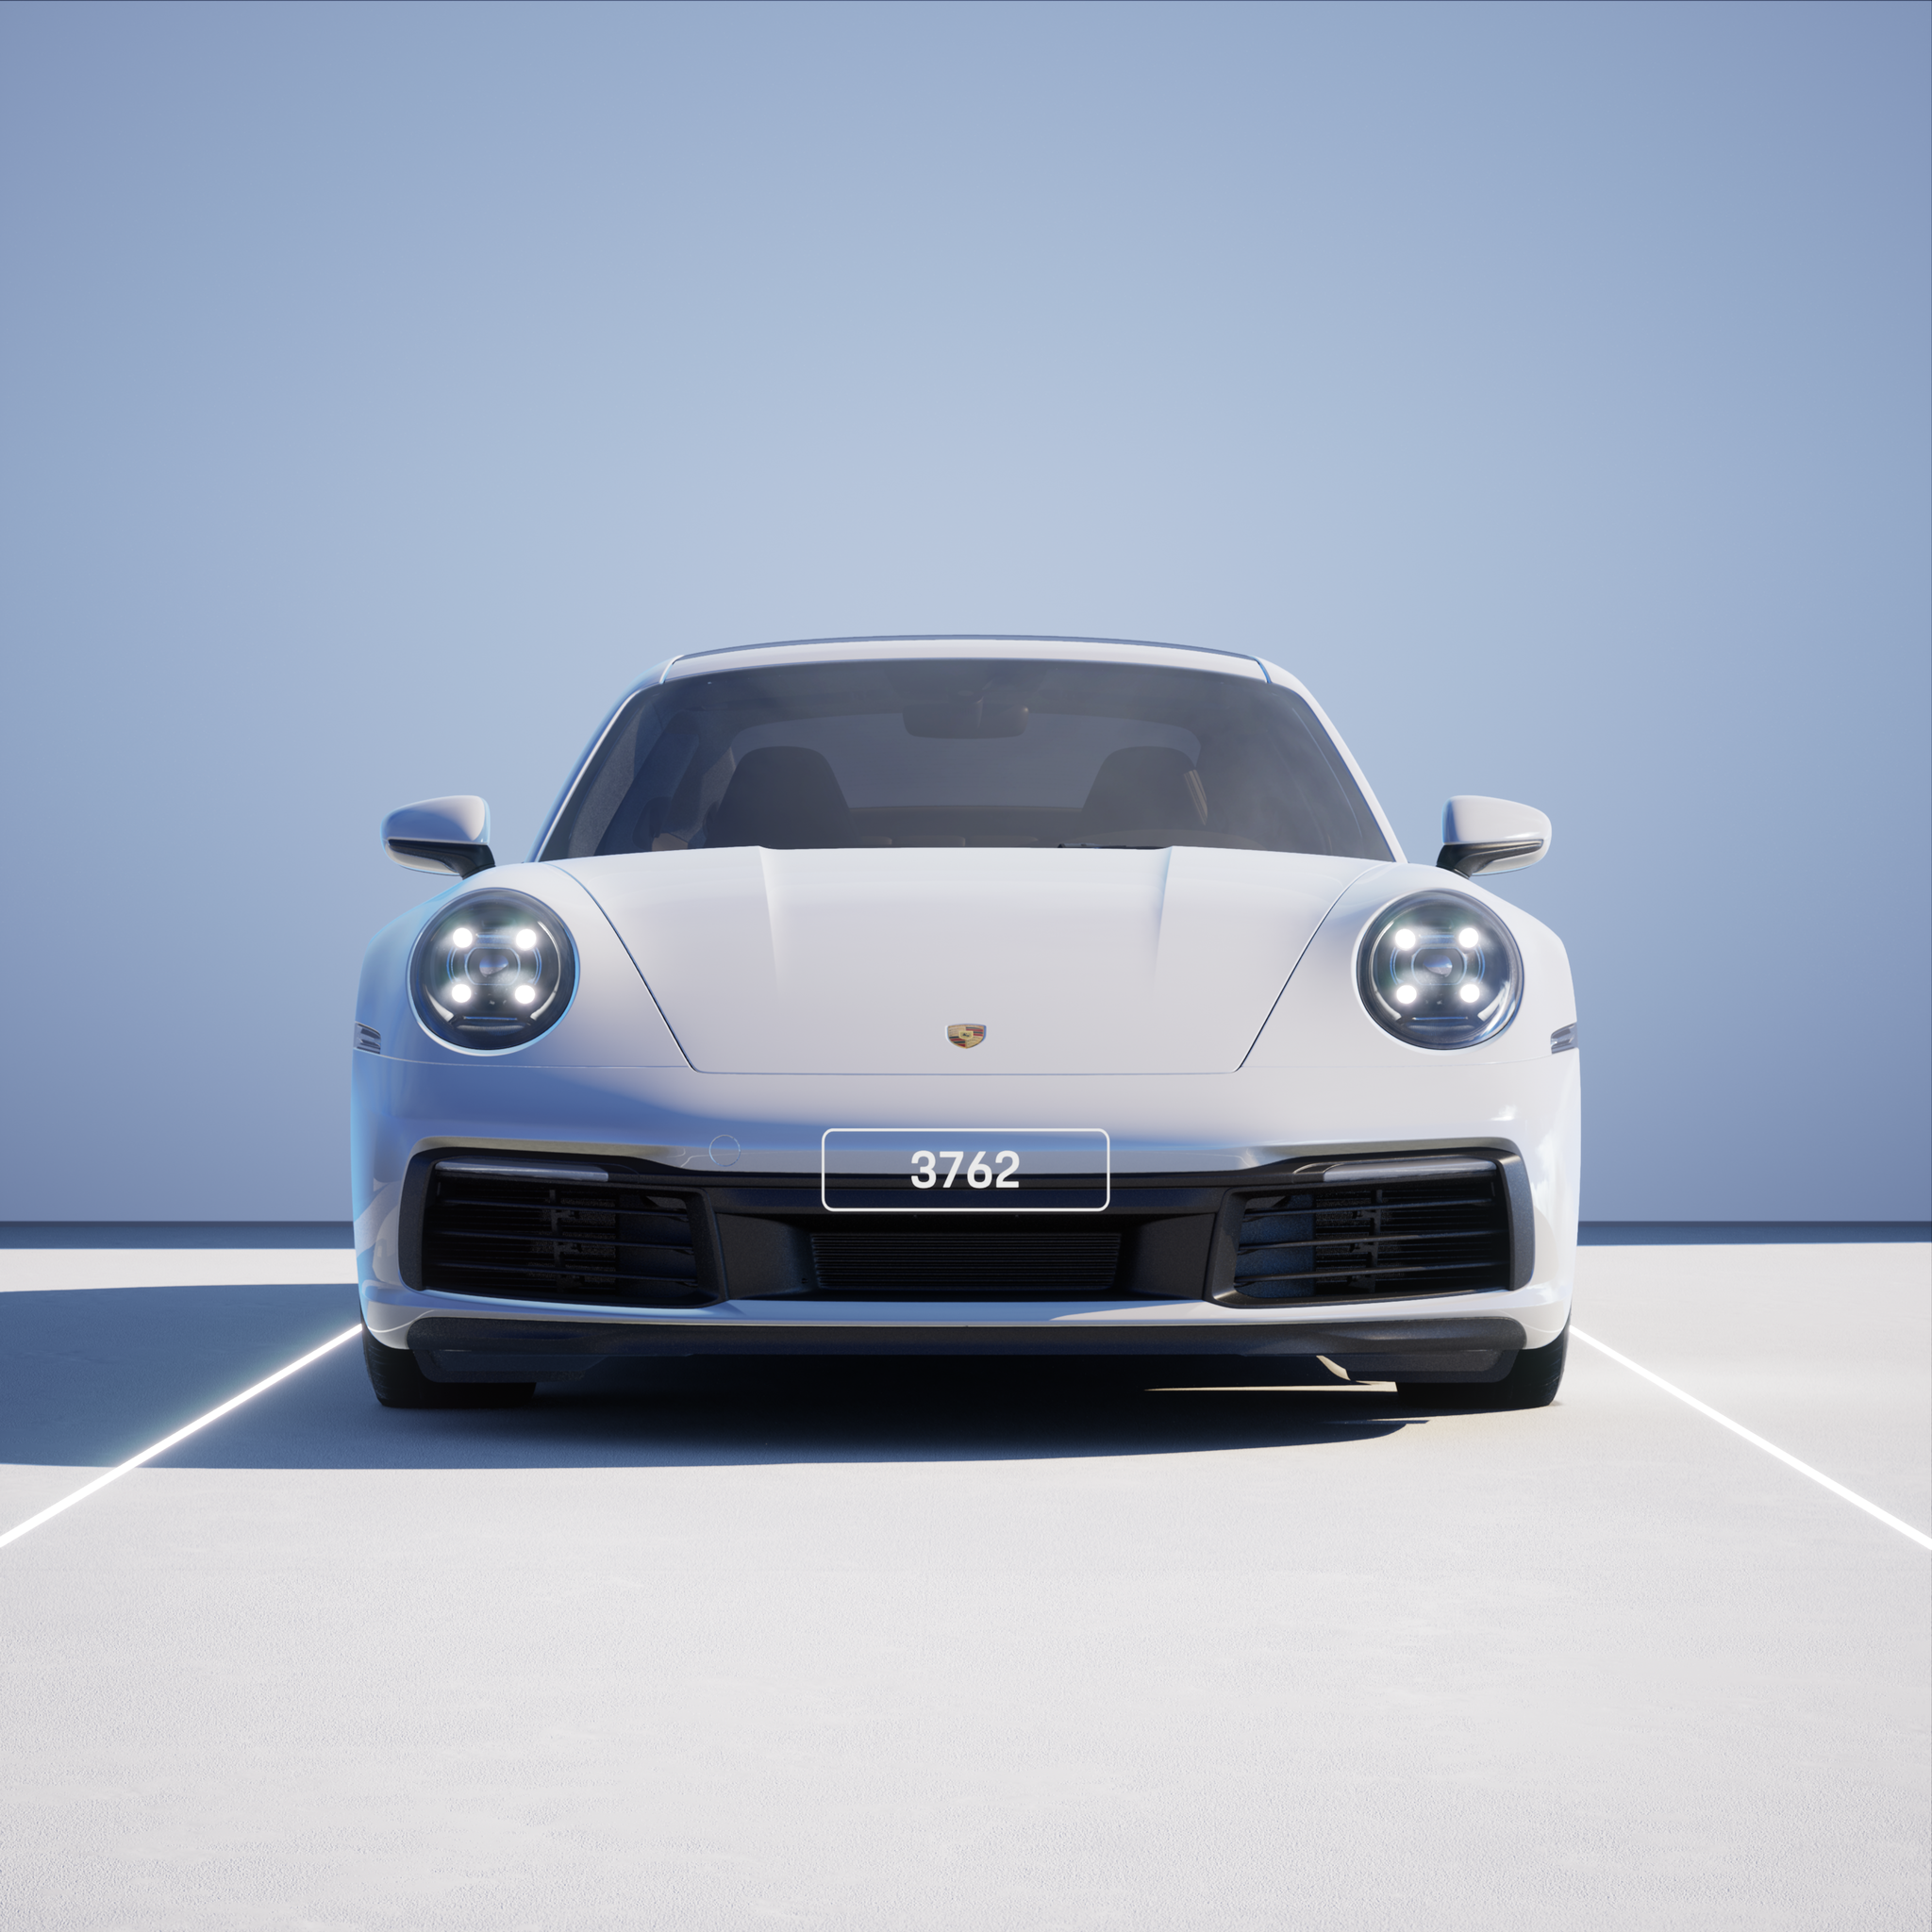 The PORSCHΞ 911 3762 image in phase